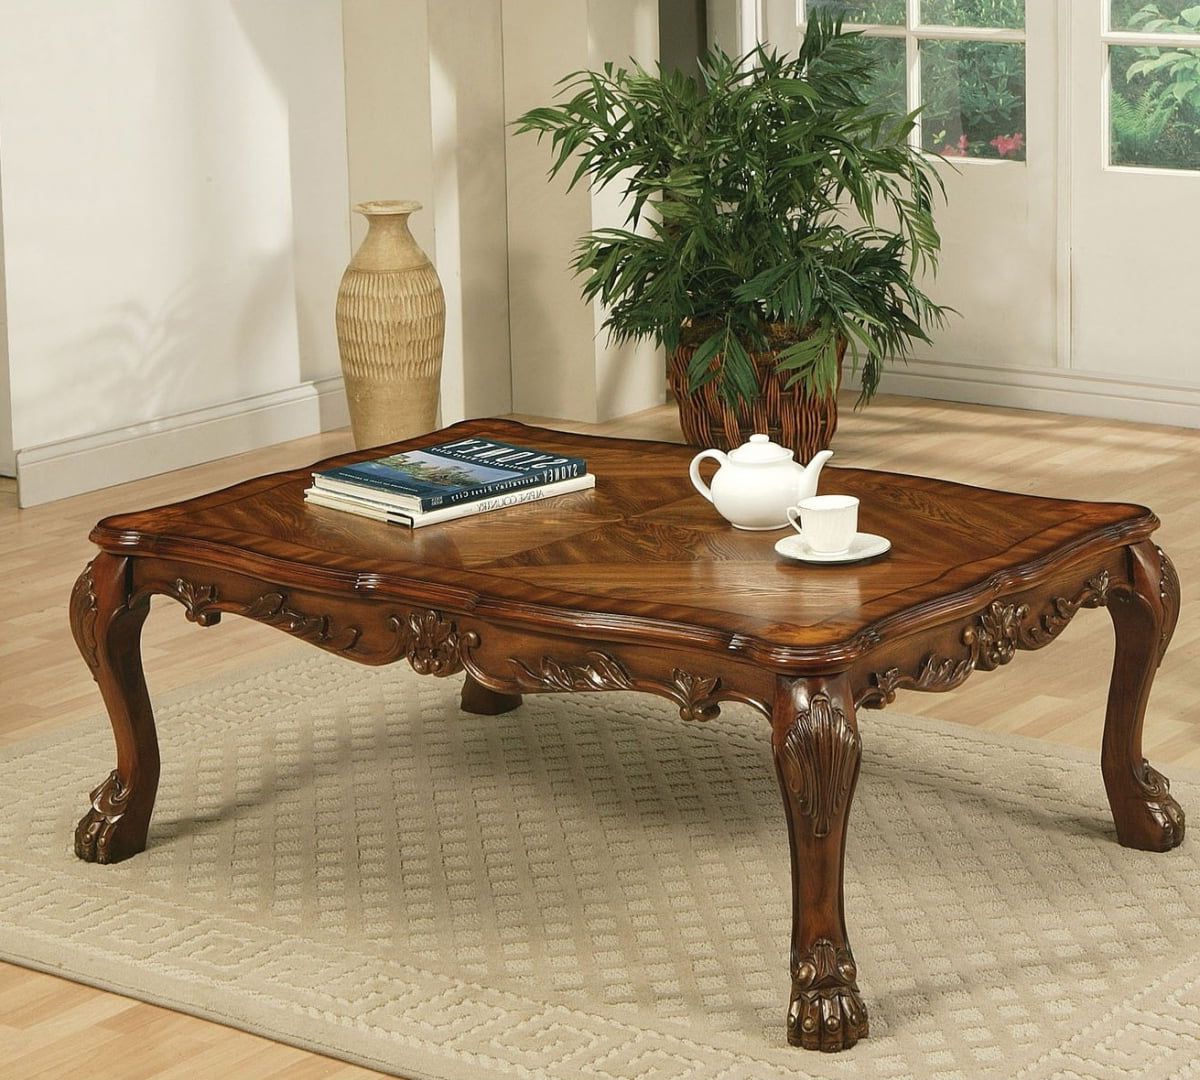 Occasional Coffee Tables For Most Current Traditional Carved Wood Occasional Coffee Table In Cherry Finish New (View 5 of 15)